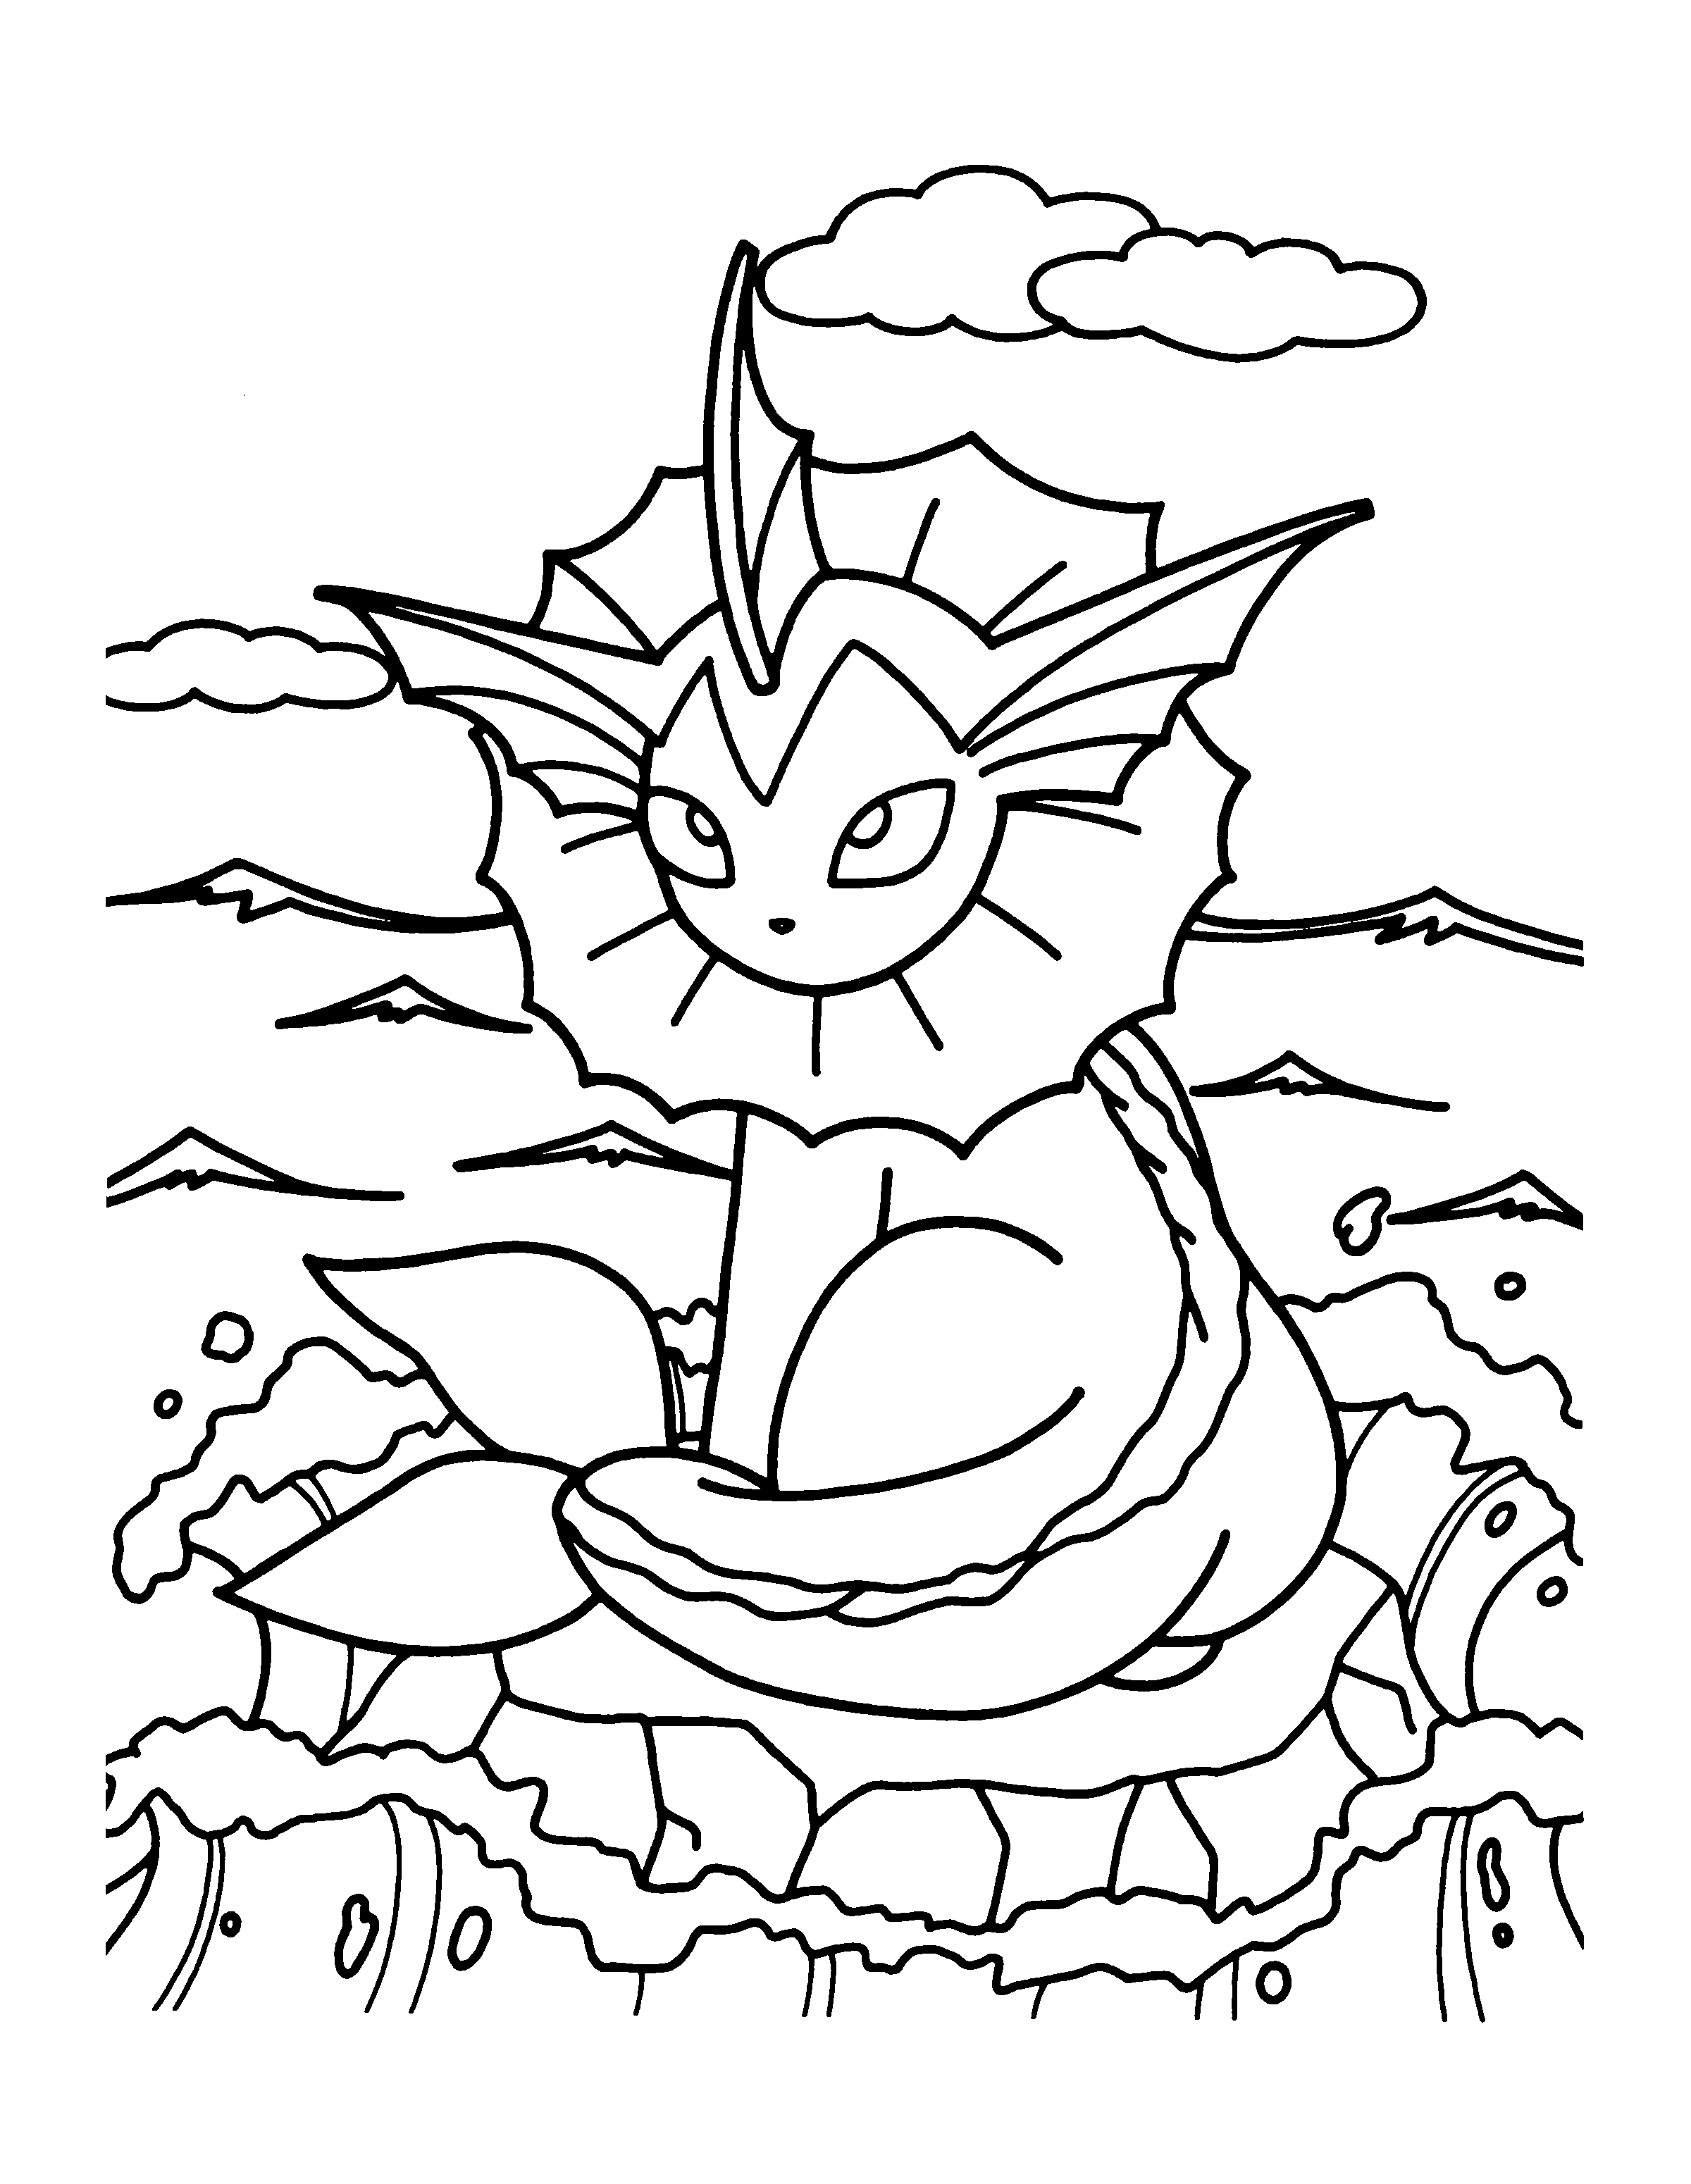 Haunter coloring page  Free Printable Coloring Pages